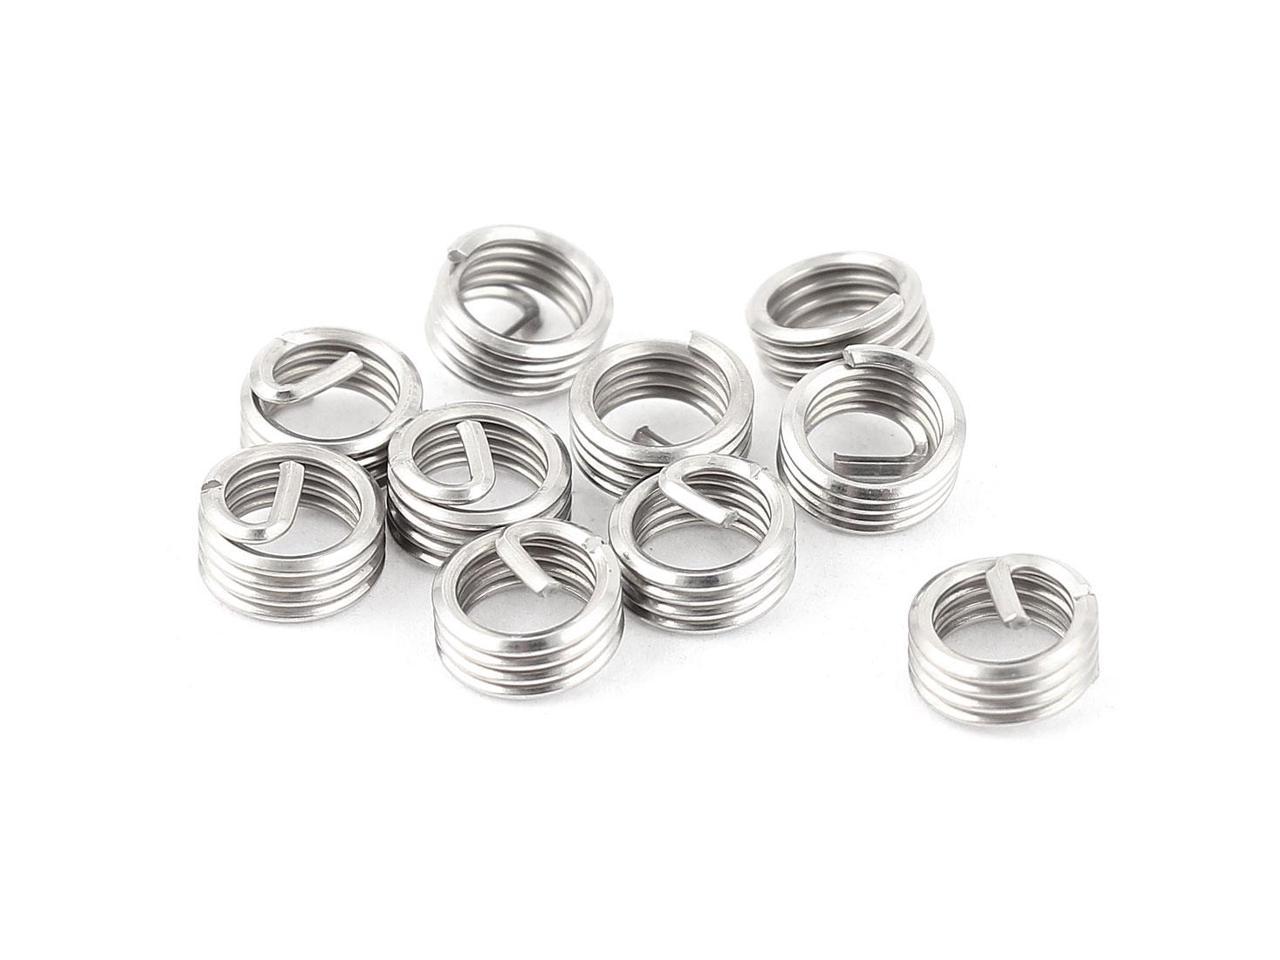 M8x1.25mmx2D 304 Stainless Steel Helicoil Wire Thread Insert 30pcs 